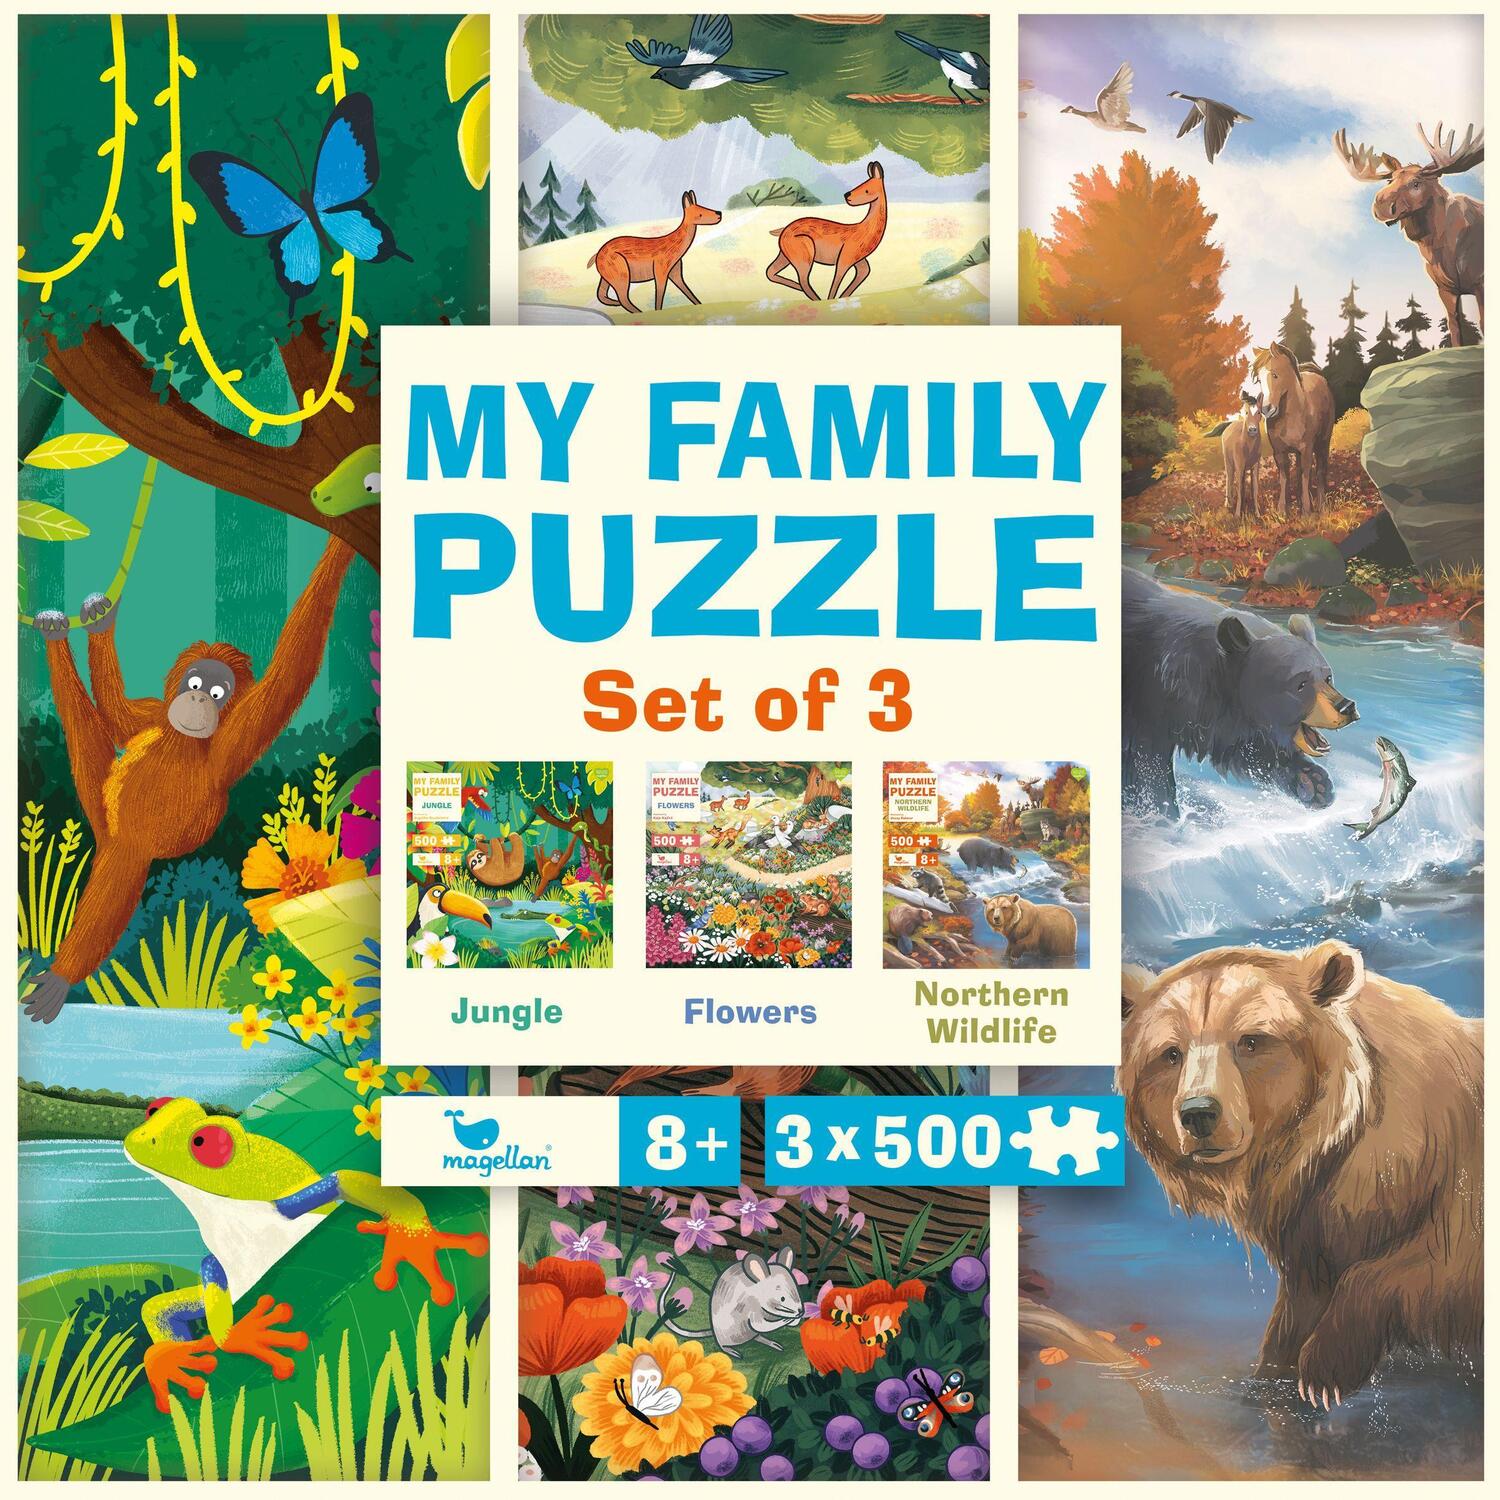 Cover: 4260671131304 | My Family Puzzle - Set of 3 - Jungle, Flowers, Northern Wildlife